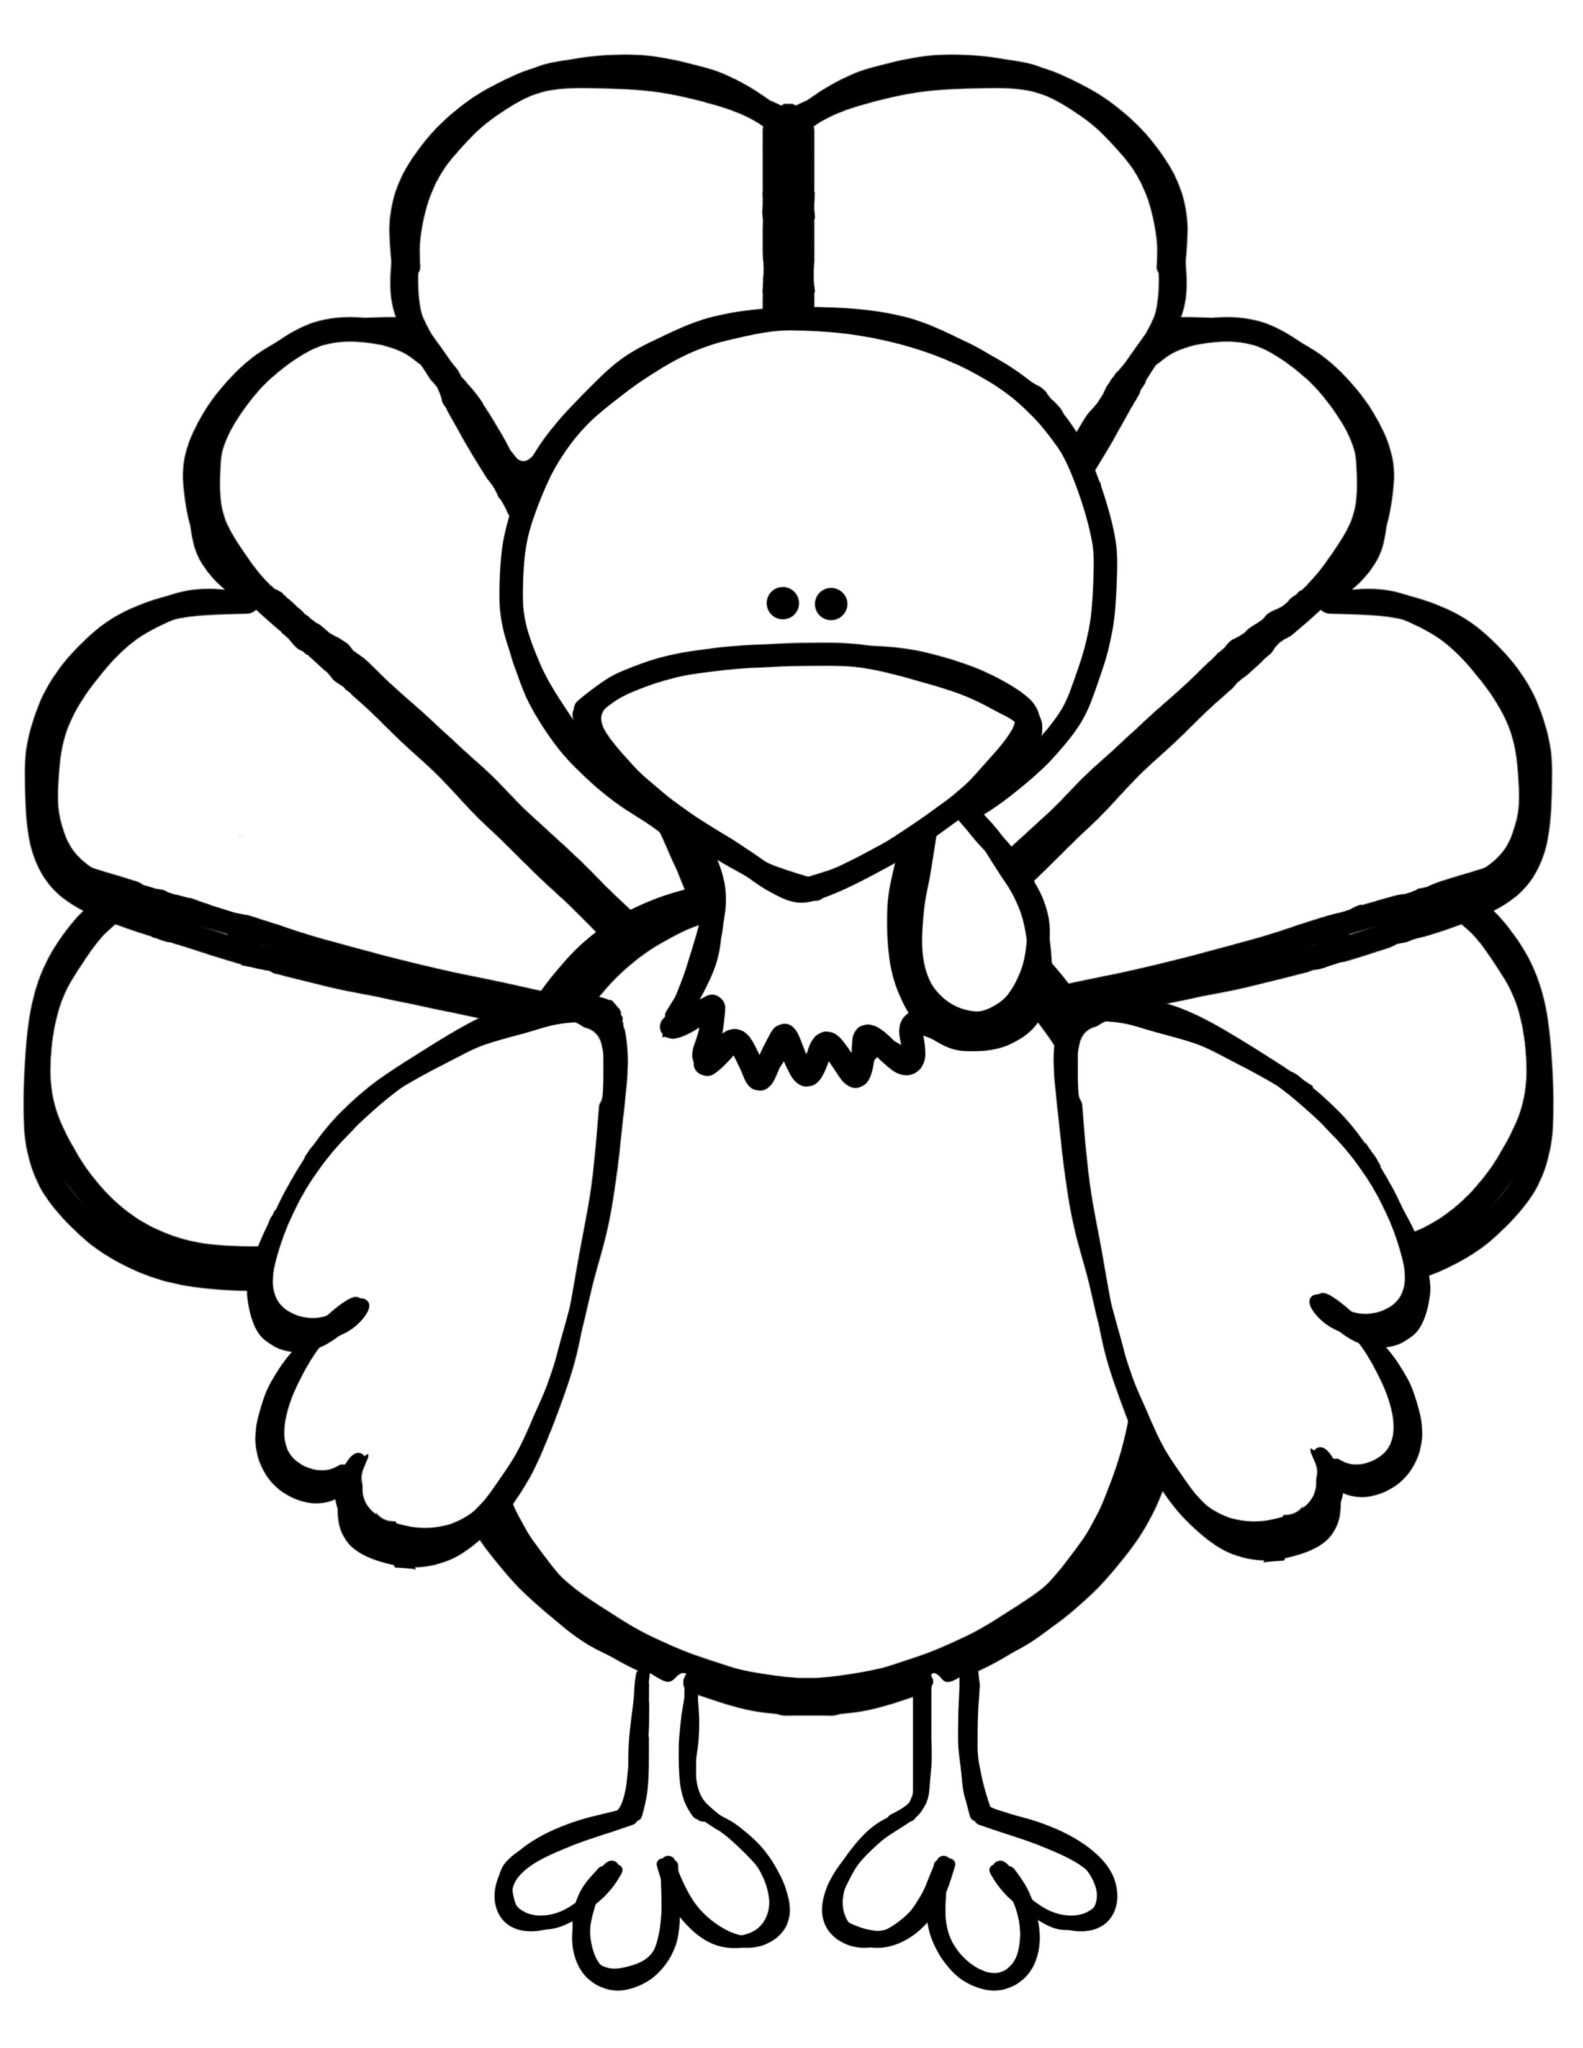 everything-you-need-for-the-turkey-disguise-project-kids-with-blank-turkey-template